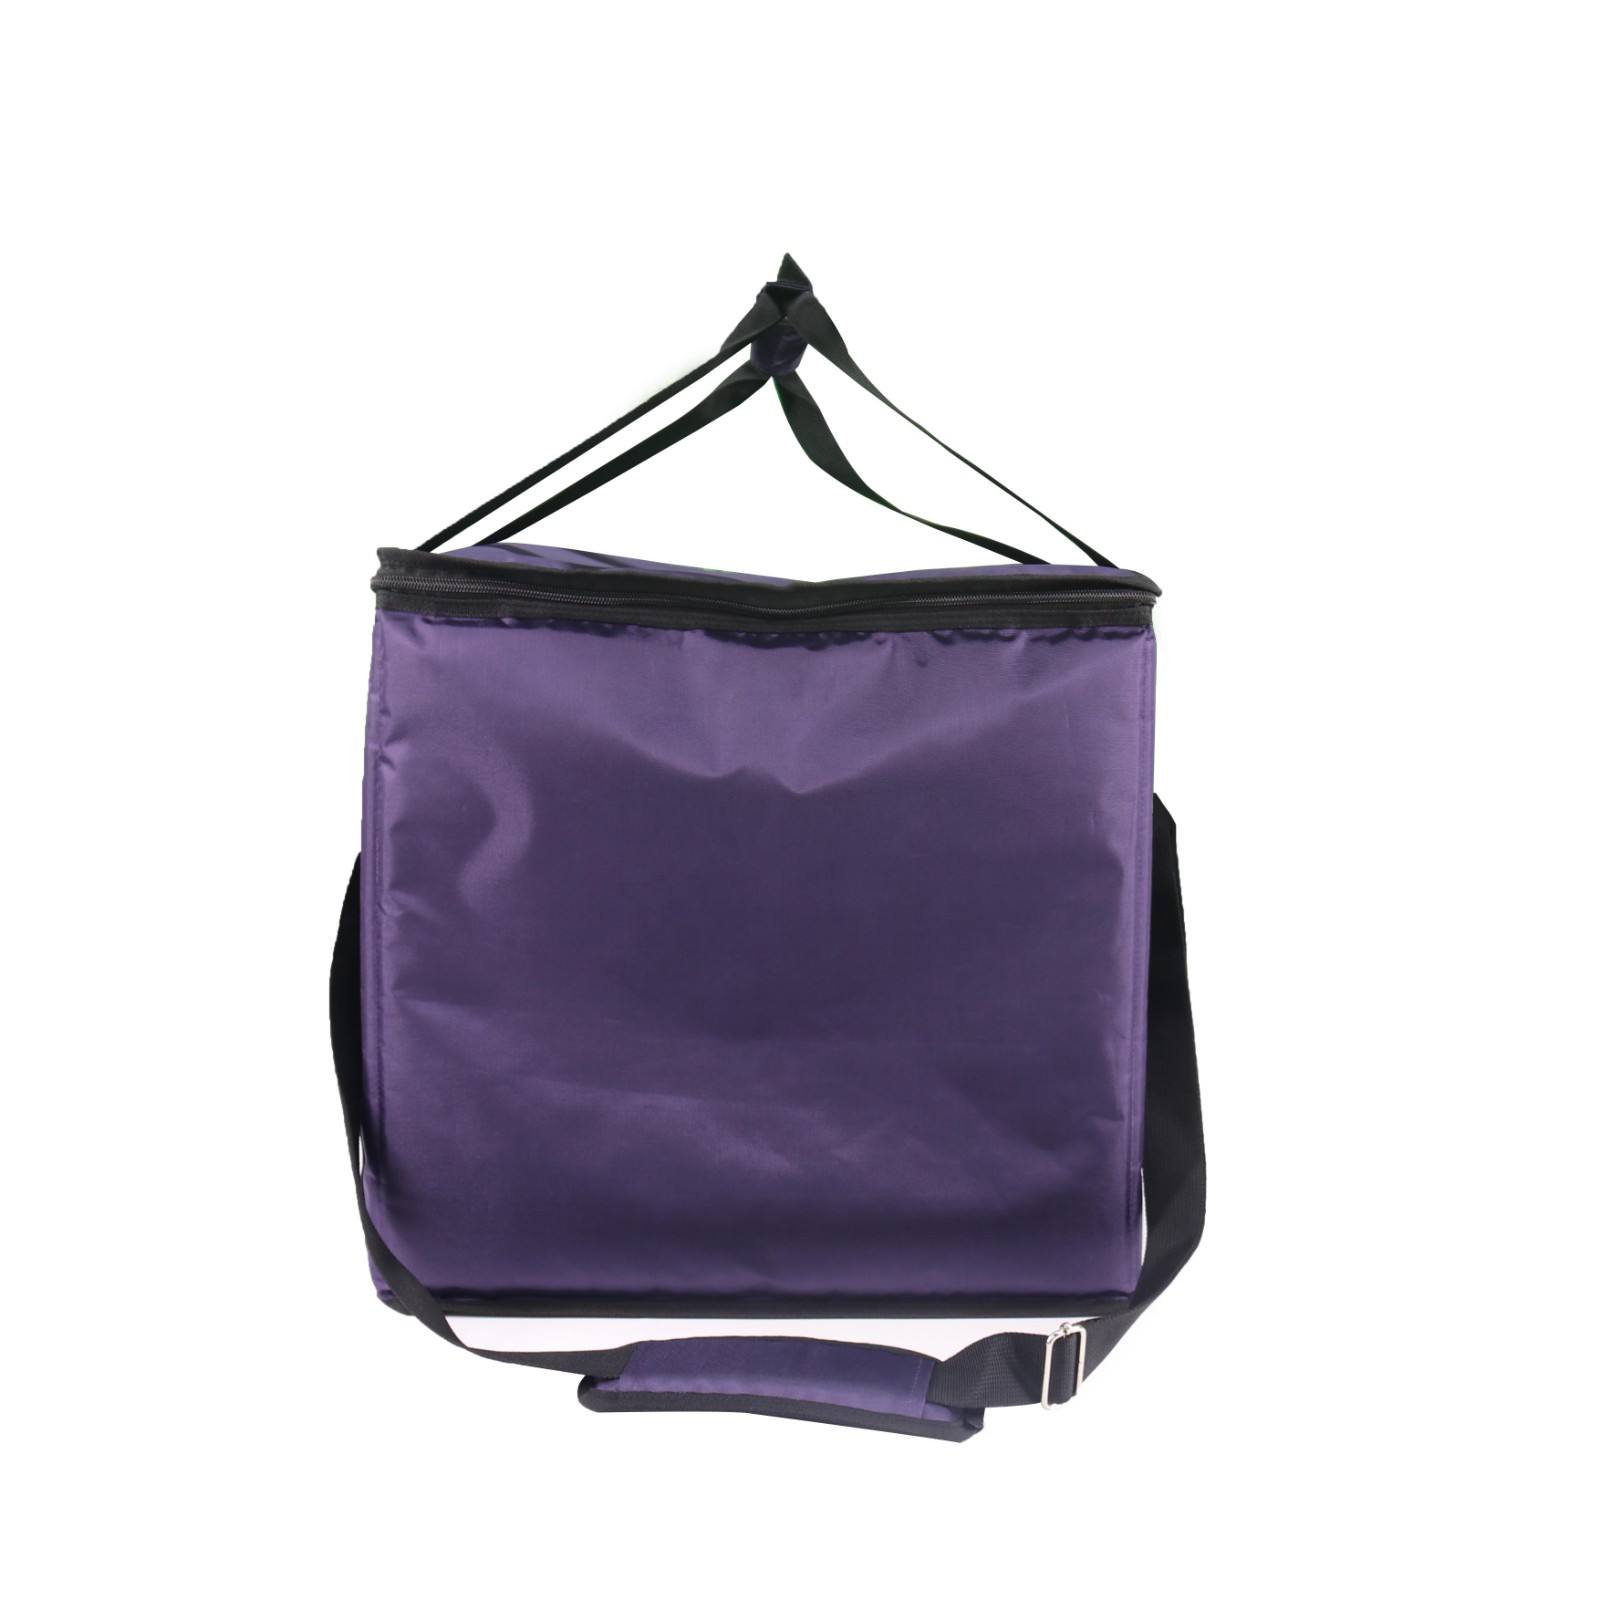 Restaurant Quality Insulated Food Delivery Tote - Perfect for Hot and Cold Deliveries